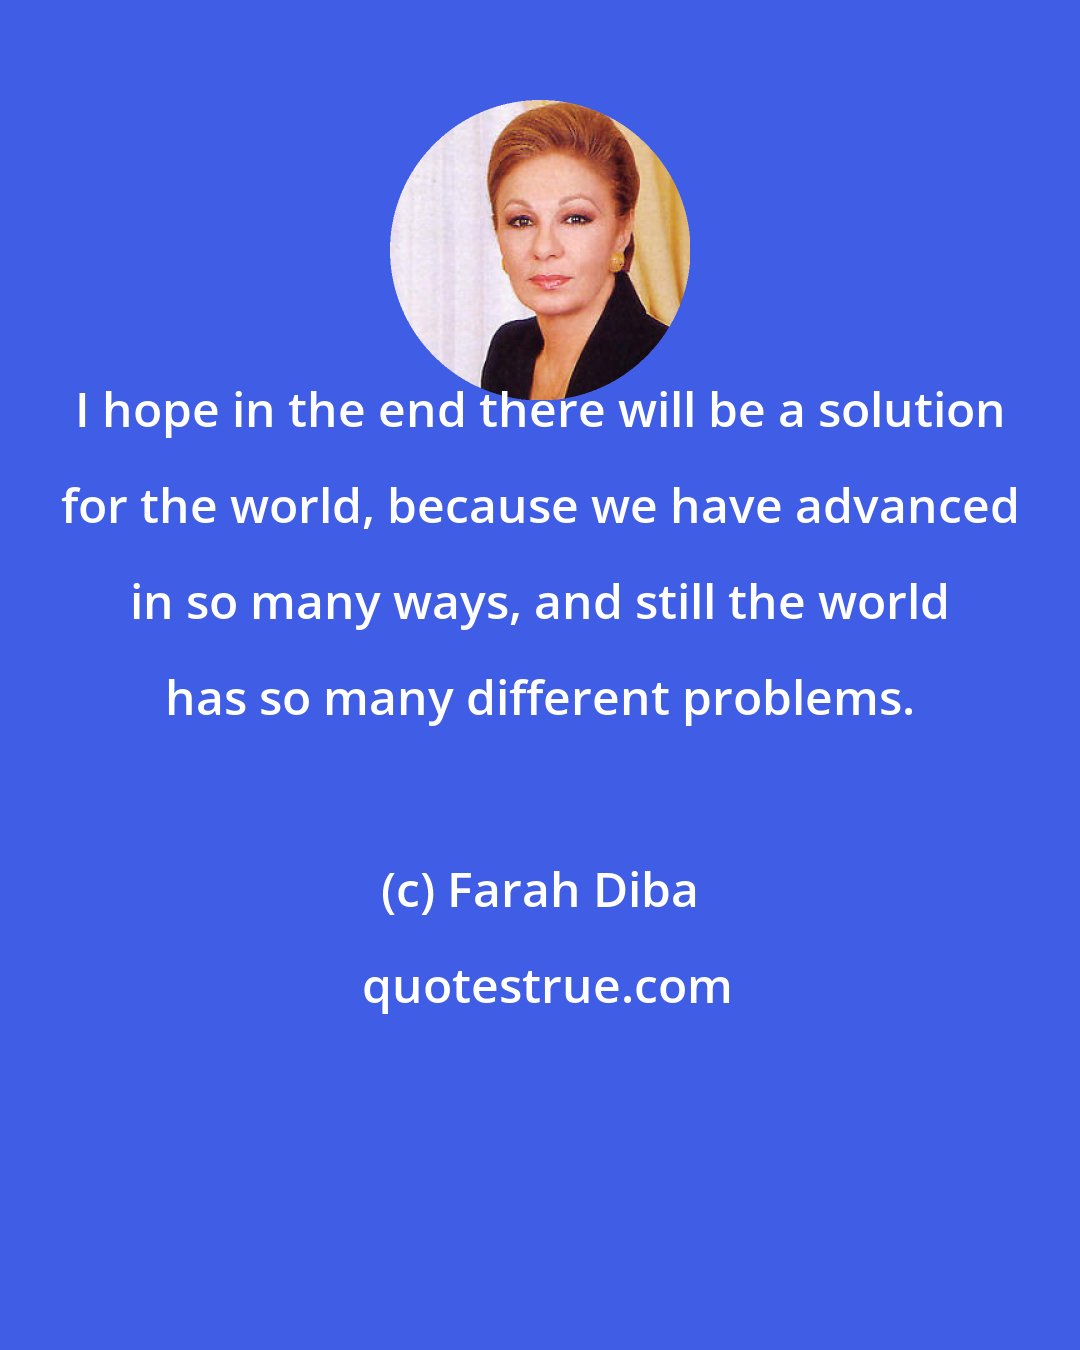 Farah Diba: I hope in the end there will be a solution for the world, because we have advanced in so many ways, and still the world has so many different problems.